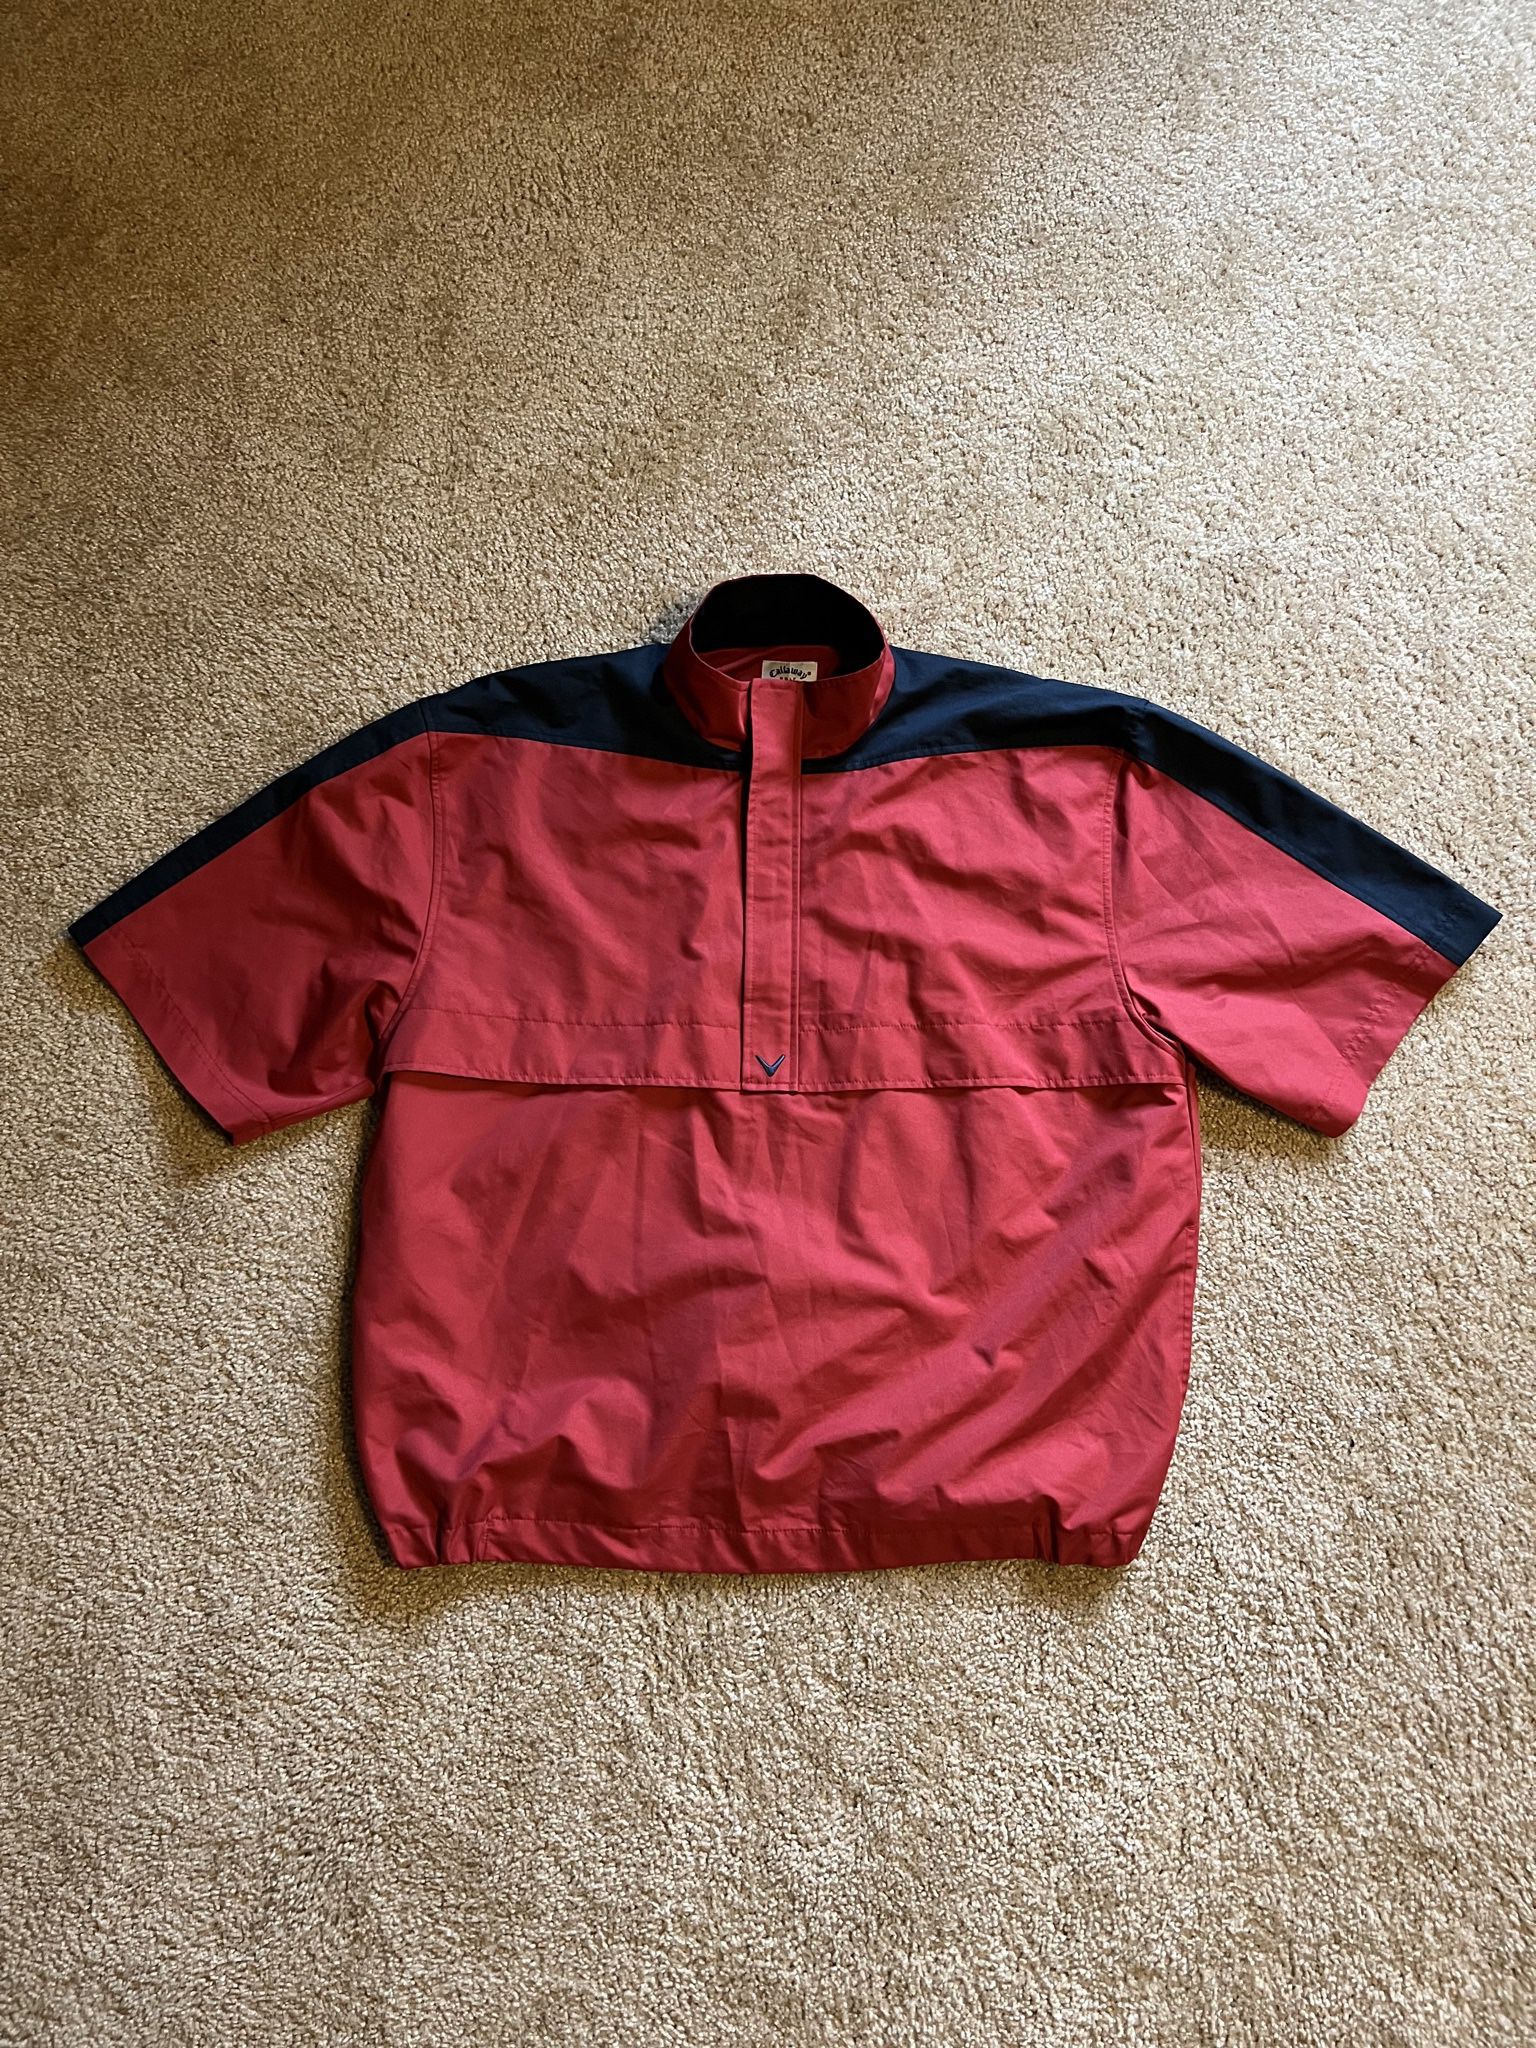 CALLAWAY / Golf Pullover WATERPROOF Coat ATHLETIC Jacket / SIZE: Mens X-Large XL / New w/o Tags!! / Red and Navy